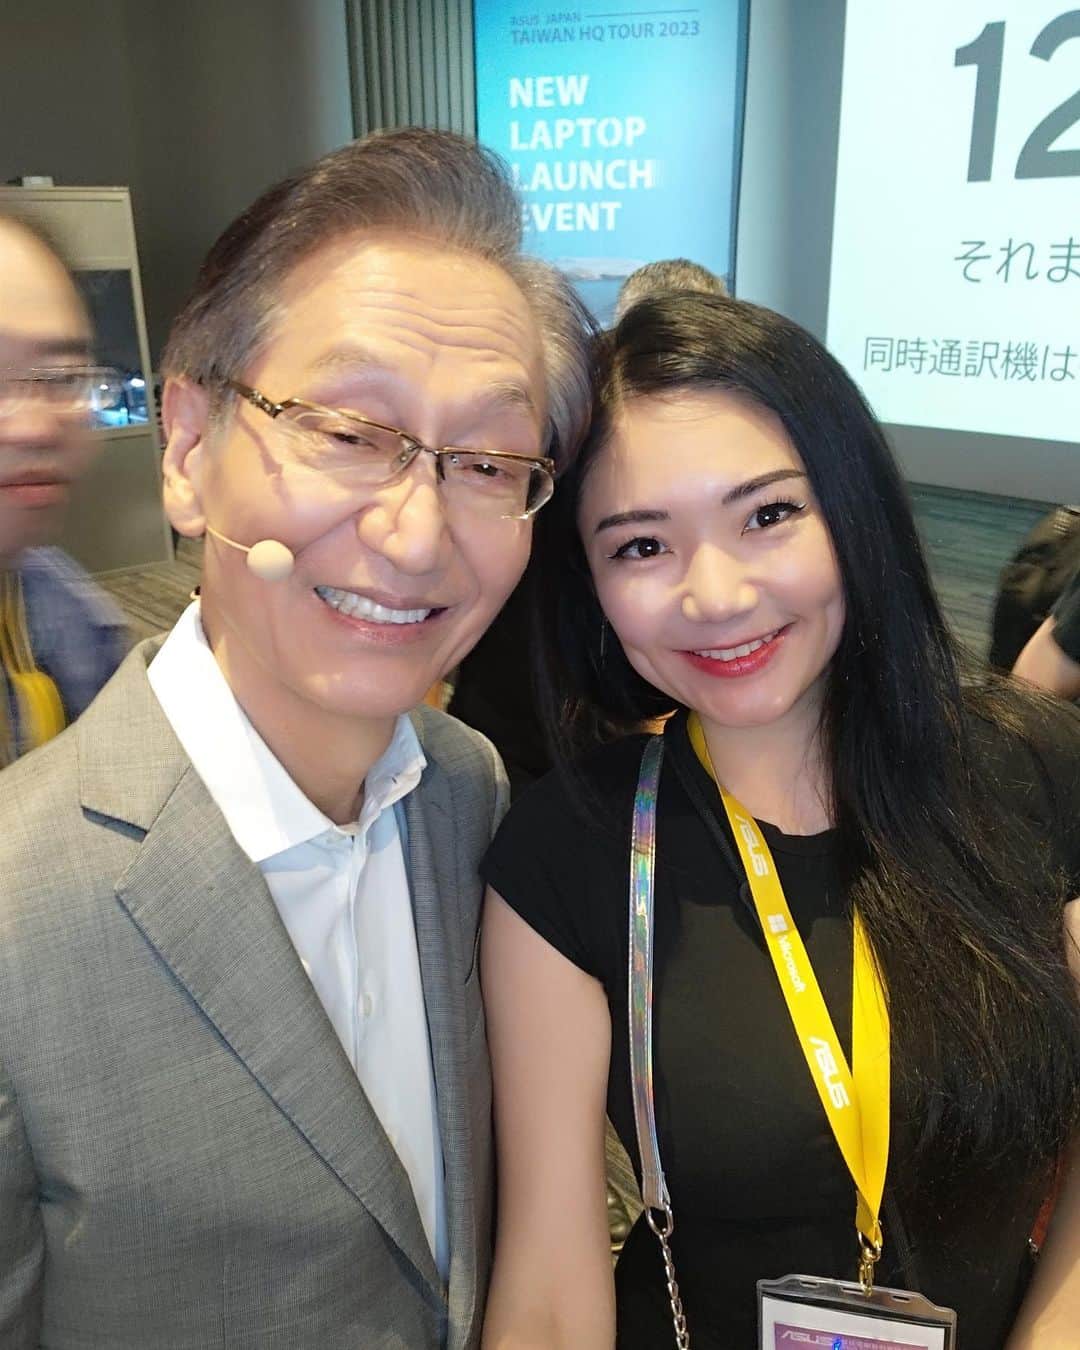 Ayanoのインスタグラム：「“Incredible!” The legend, the one and only Mr.Jonney Shih, Chairman of ASUS😆🤳✨世界シェアトップのPCメーカーASUSのジョニー・シー会長とセルフィー #SelfieWithCEO #AyanoWithCEO #SelfieWithChairman」